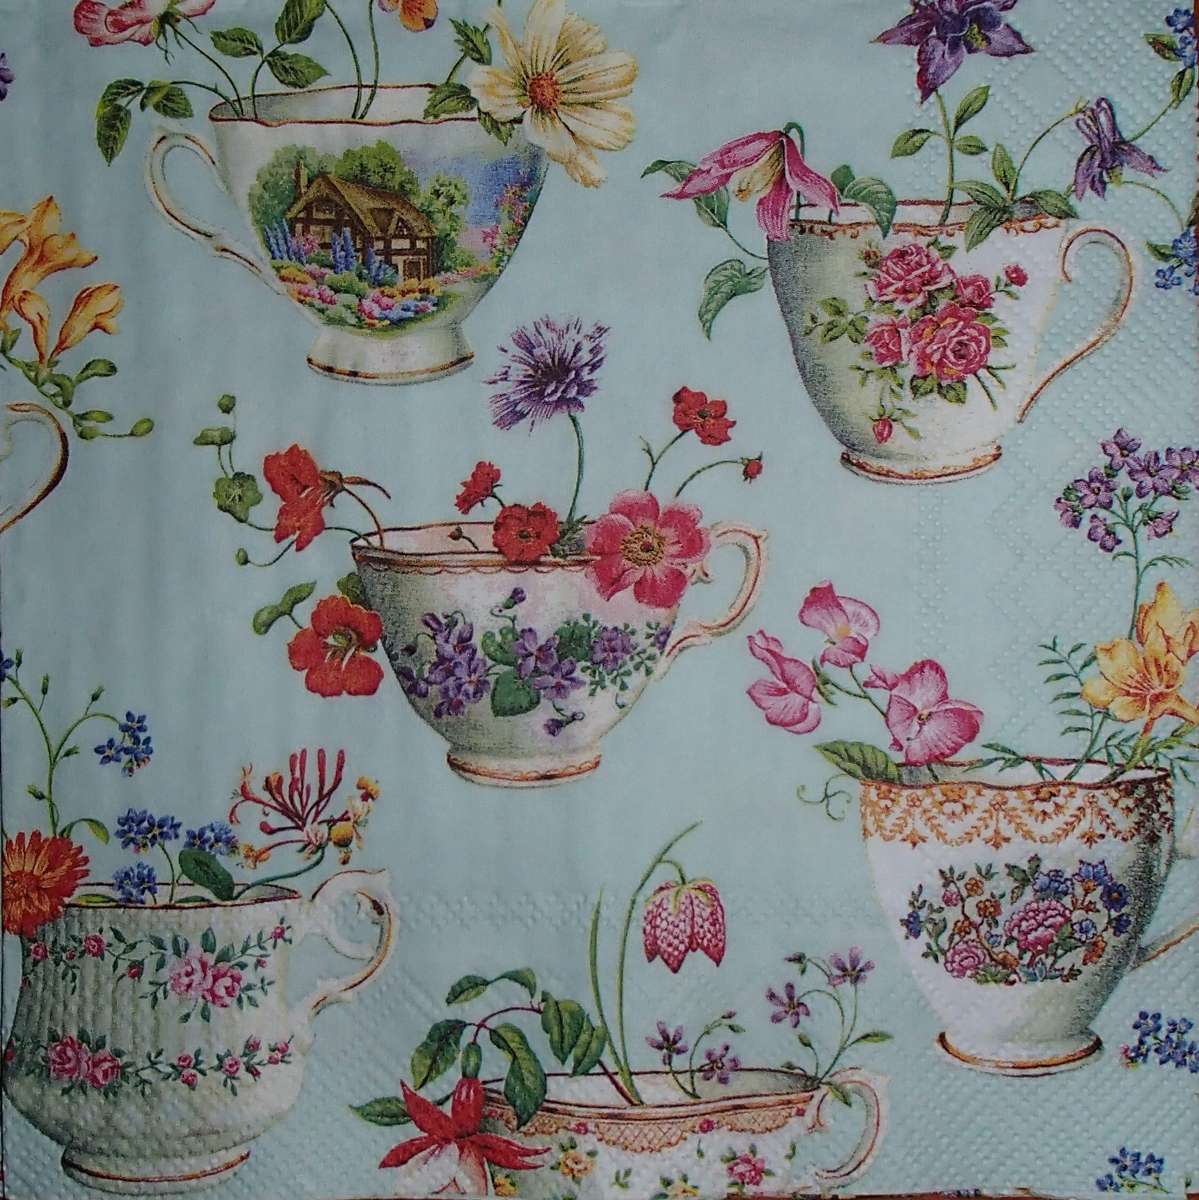 Flowers in Teacups online puzzle